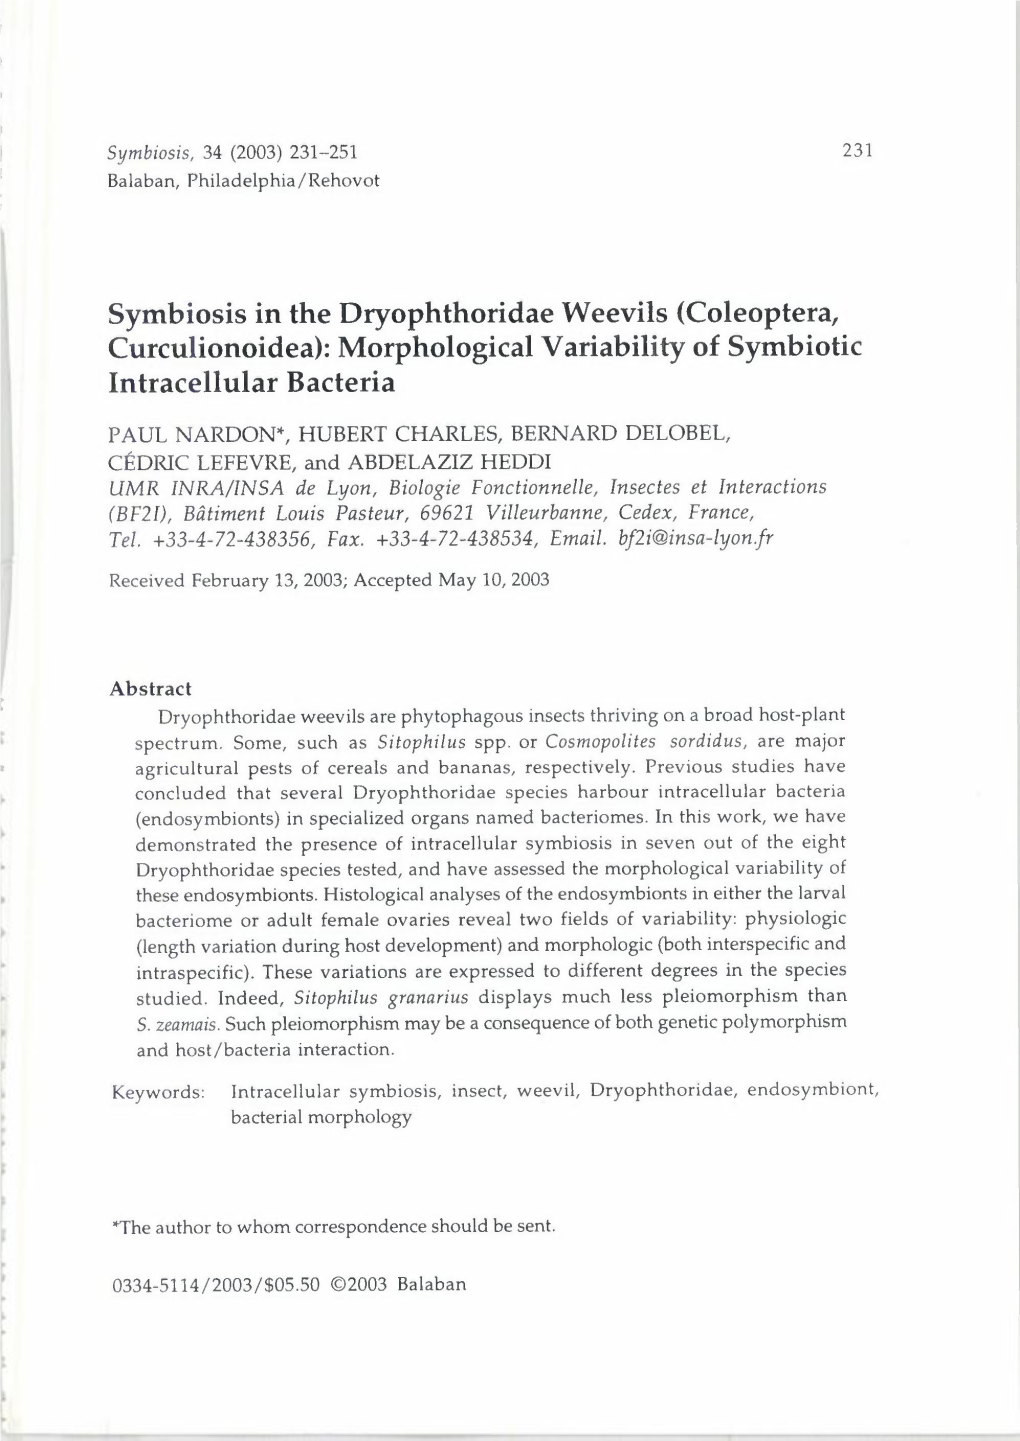 Symbiosis in the Dryophthoridae Weevils (Coleoptera, Curculionoidea): Morphological Variability of Symbiotic Intracellular Bacteria